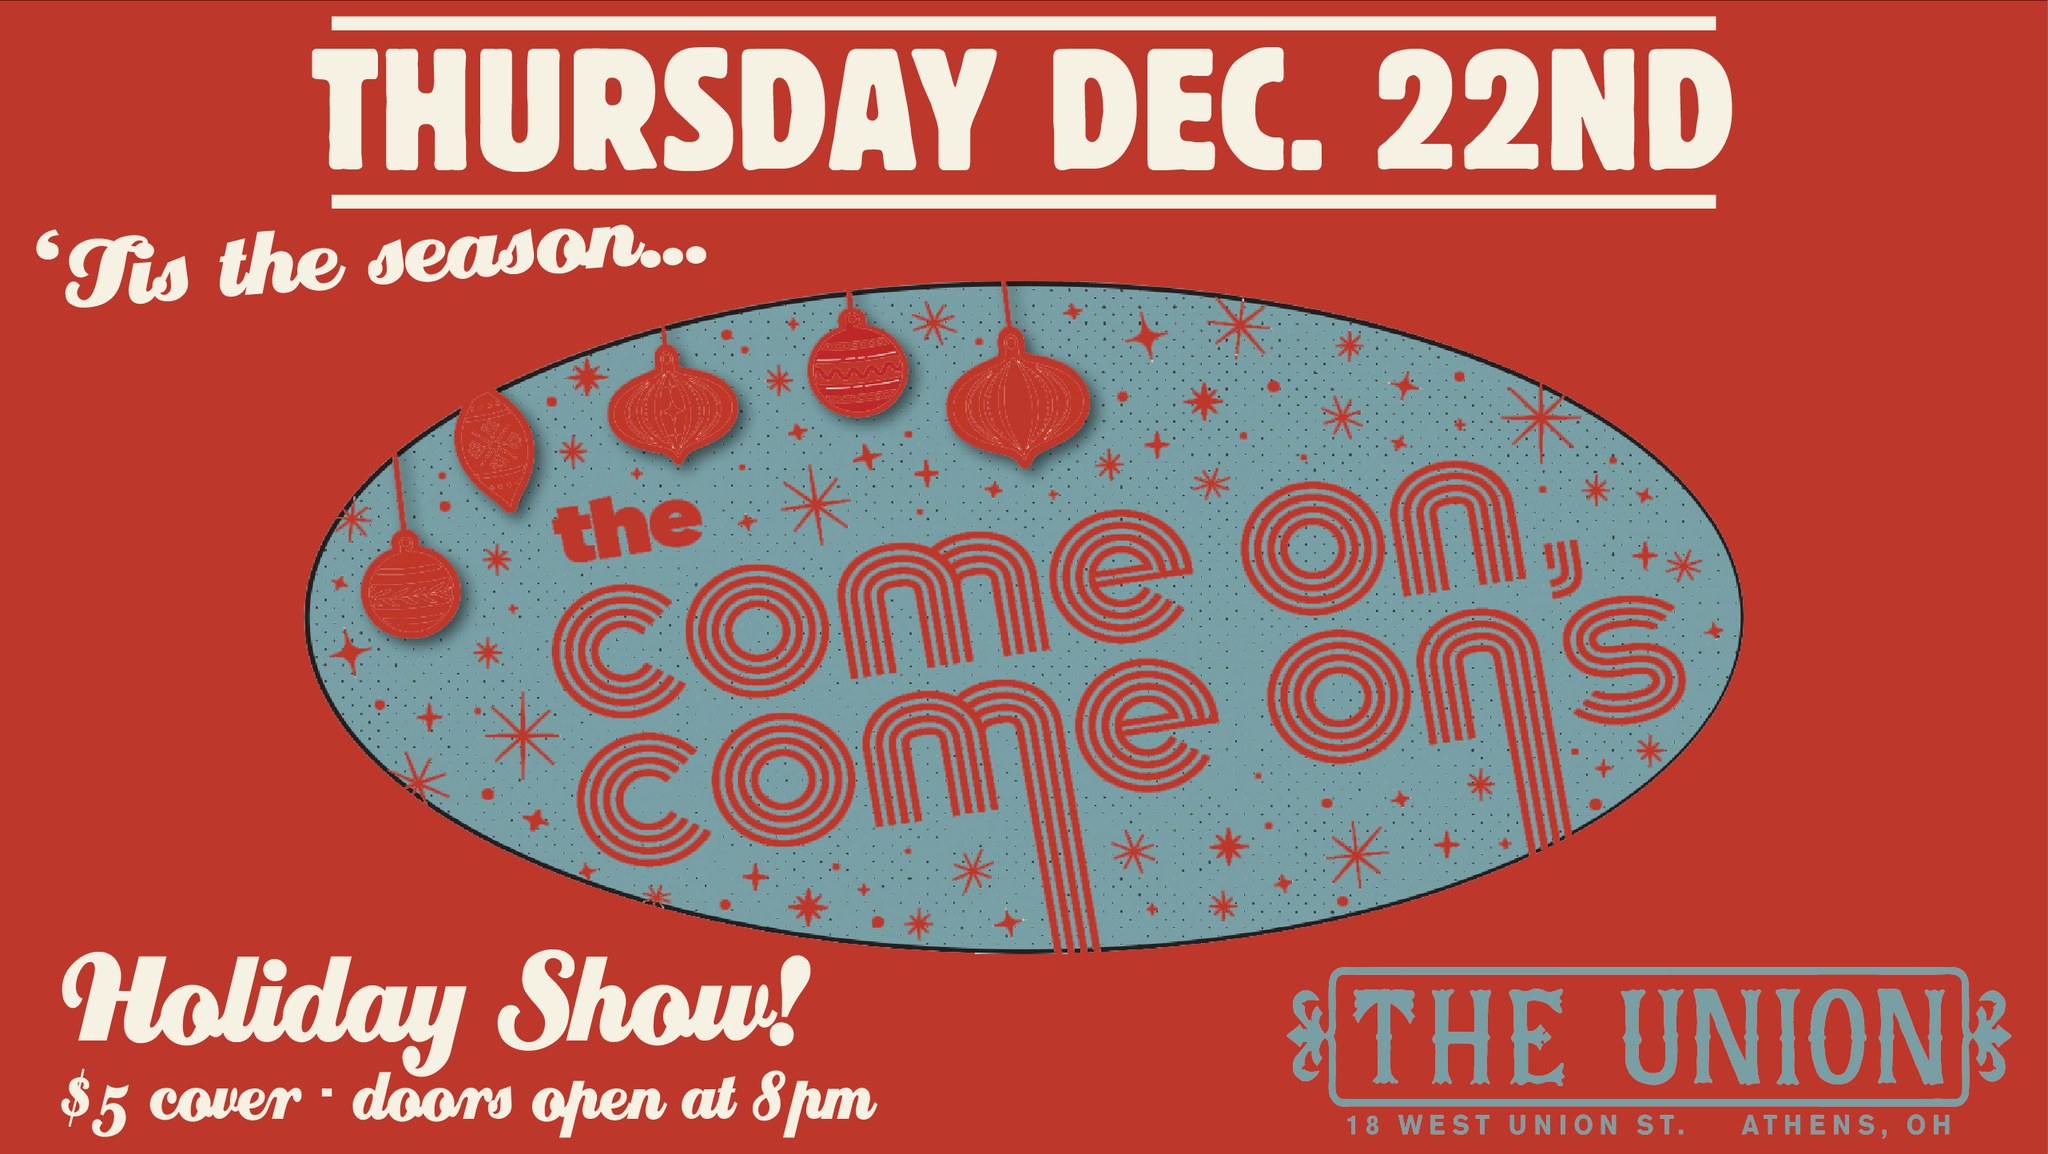 A red and green flyer for the Come On Come Ons holiday show.